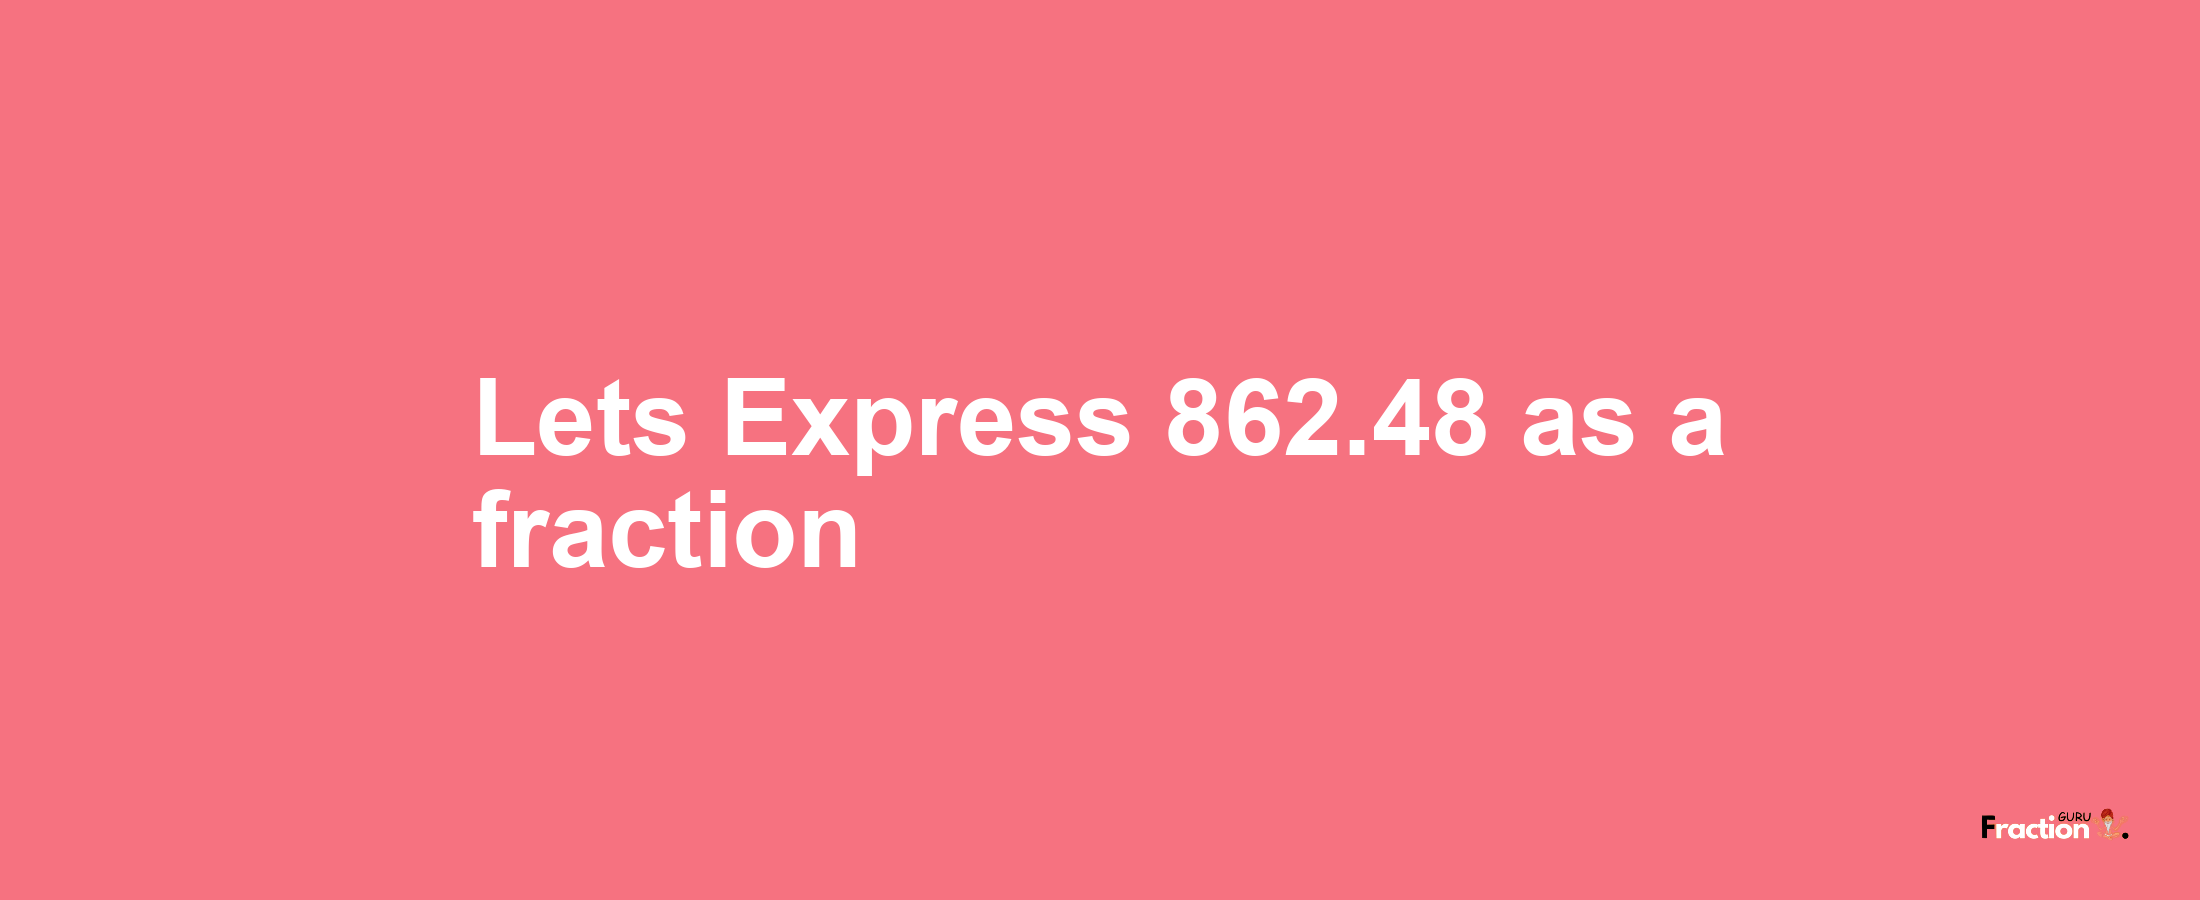 Lets Express 862.48 as afraction